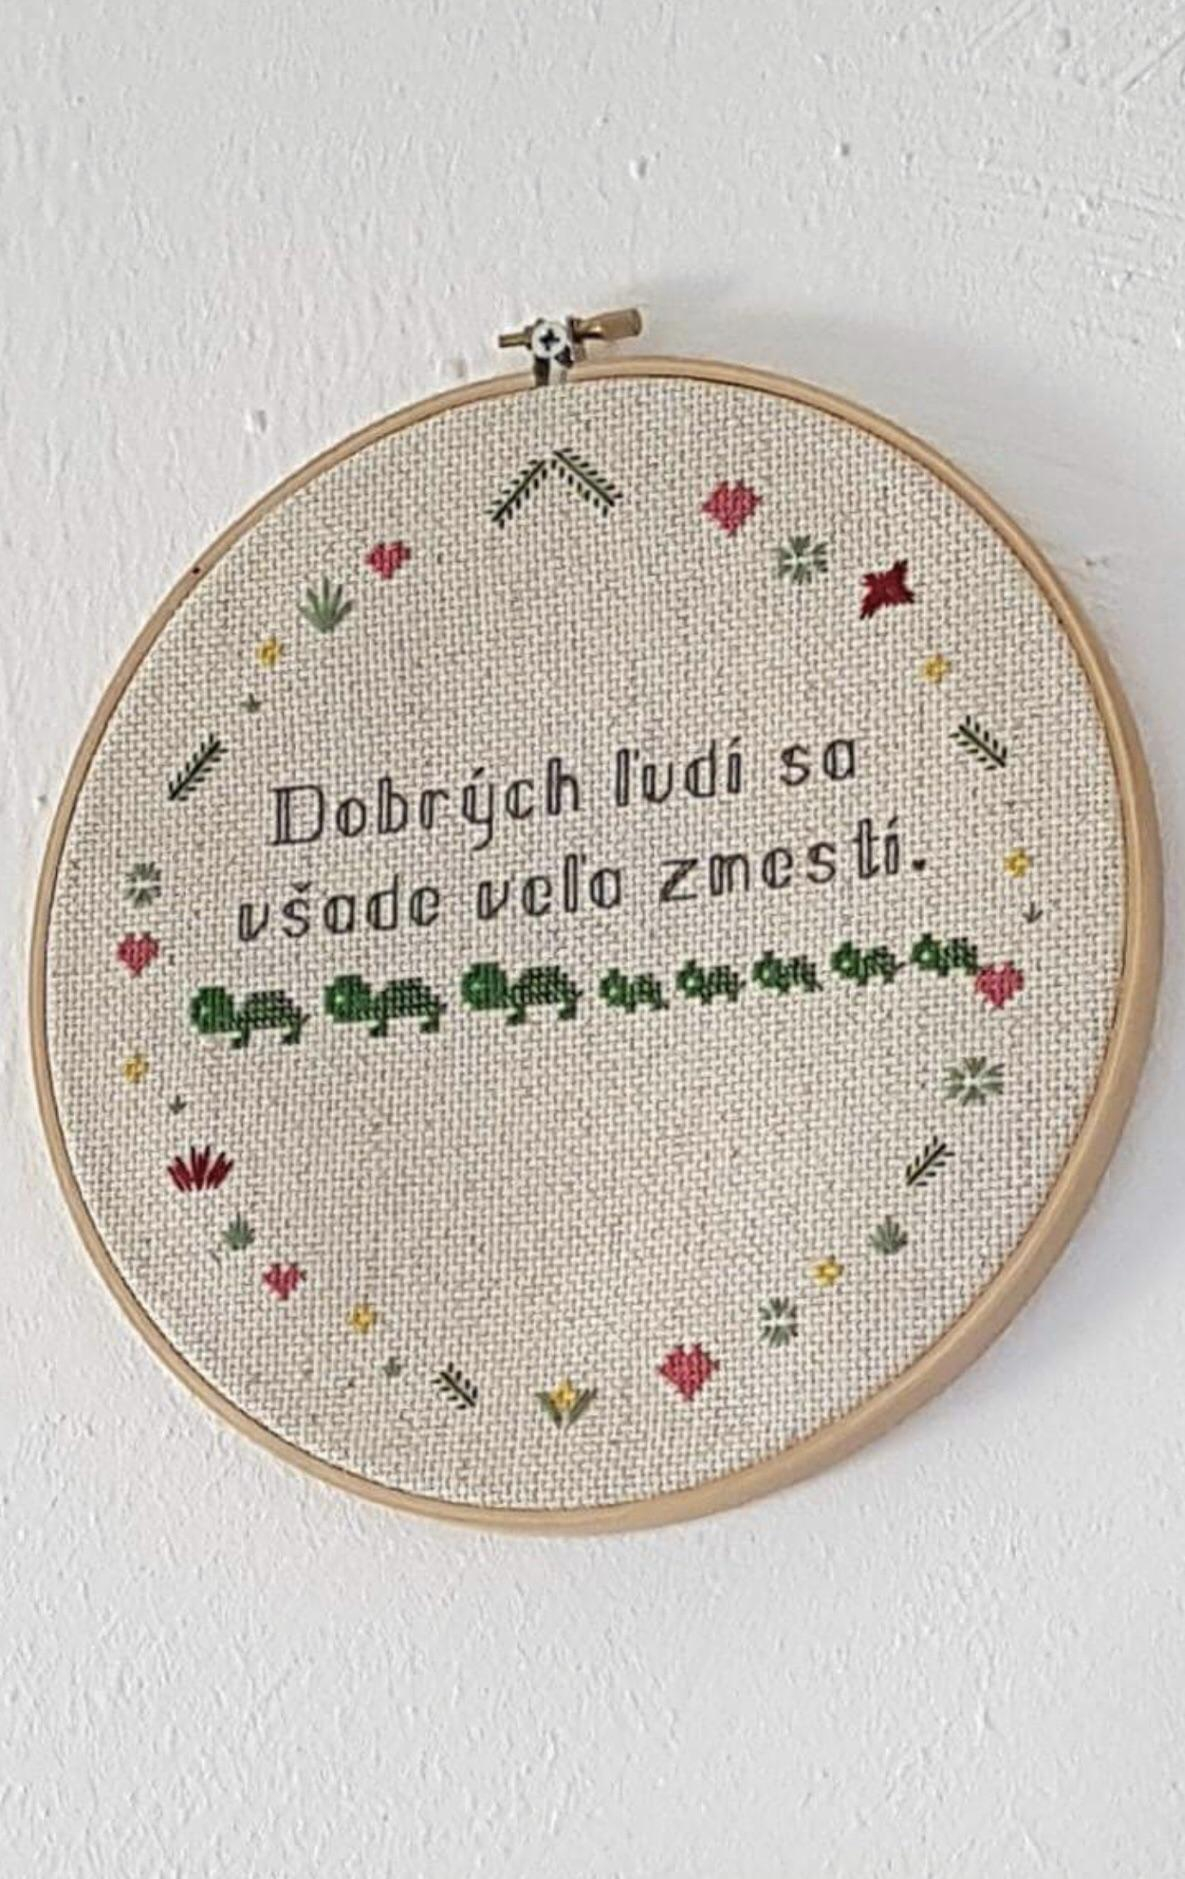 Slovak Embroidery Patterns Fo A Simple Gift I Made After Visiting My Husbands Slovakian